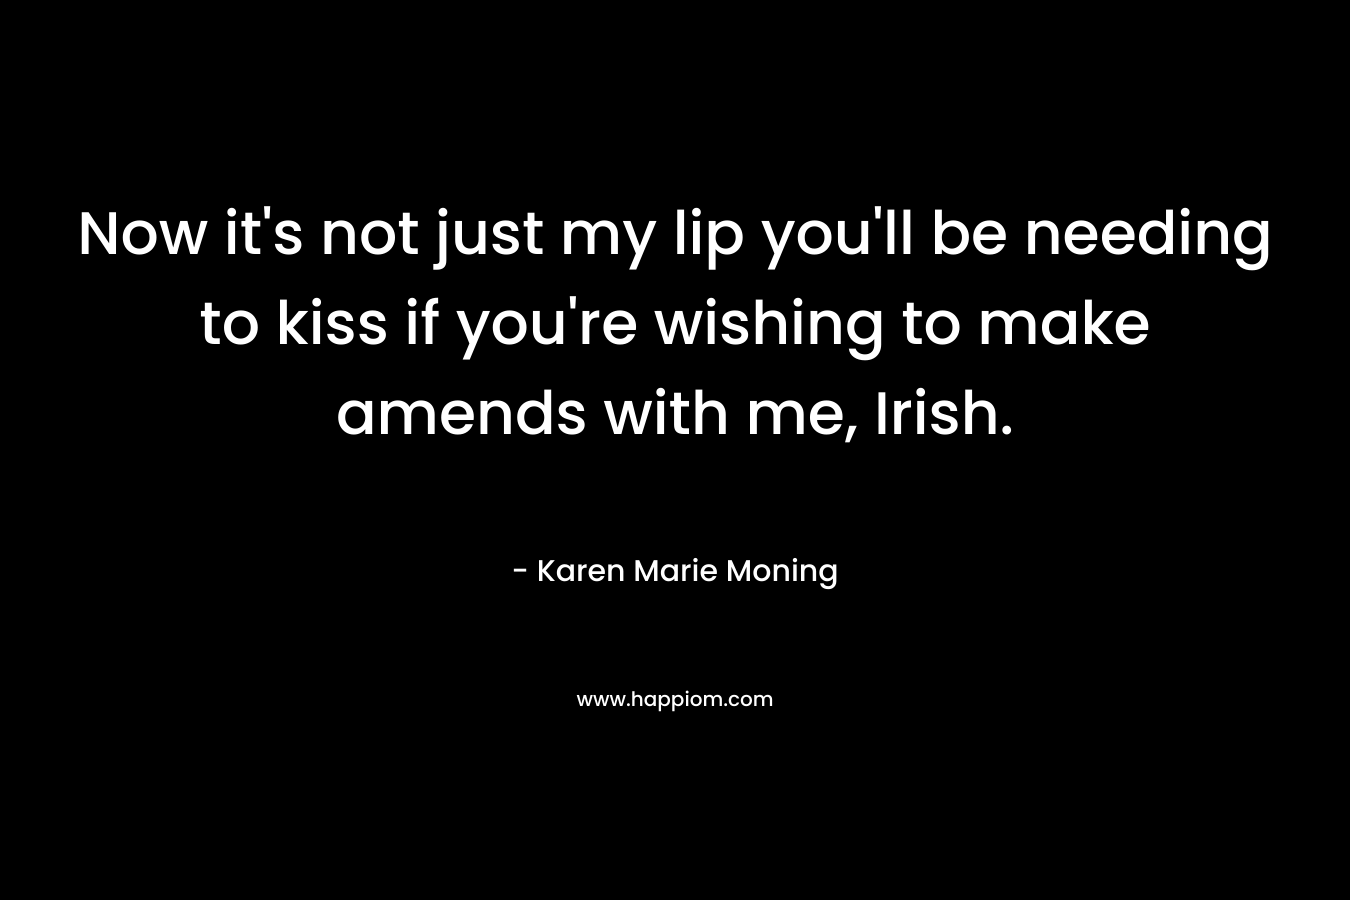 Now it’s not just my lip you’ll be needing to kiss if you’re wishing to make amends with me, Irish. – Karen Marie Moning